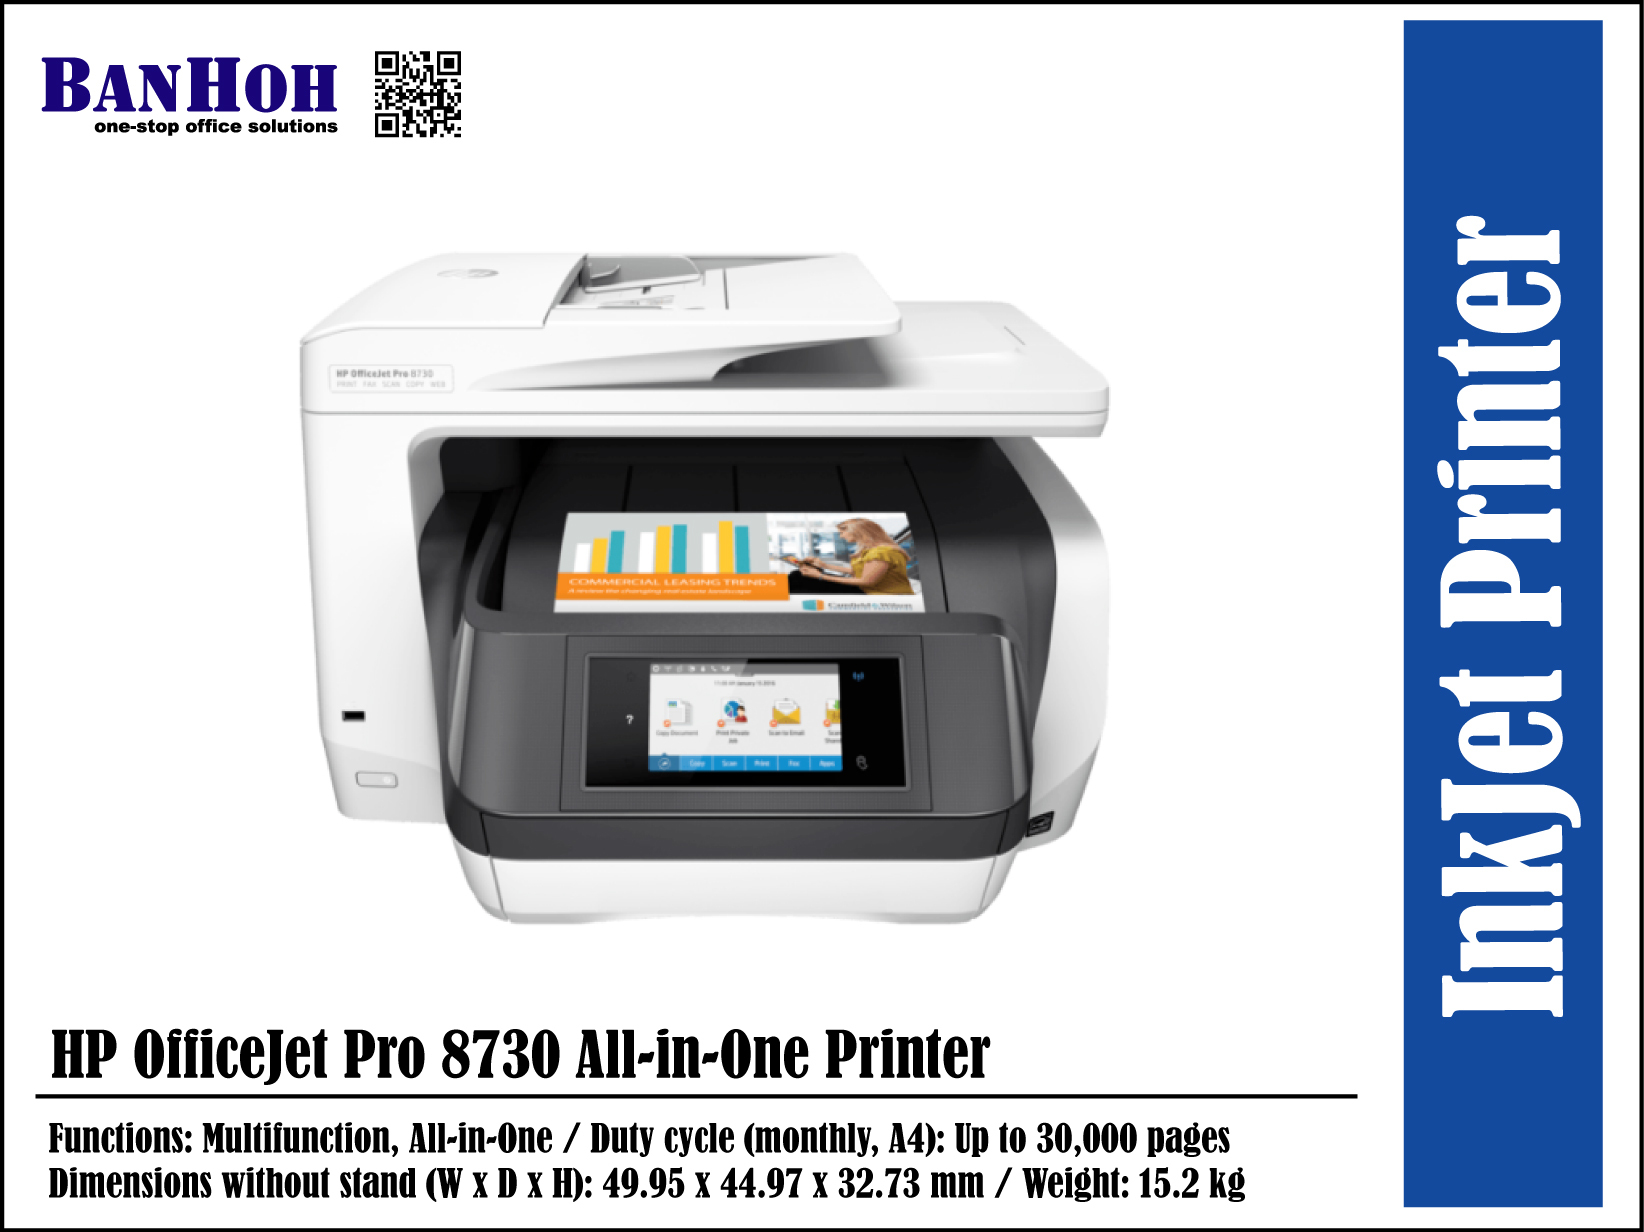 HP OfficeJet Pro 8730 All-in-One Printer – BANHOH SDN BHD